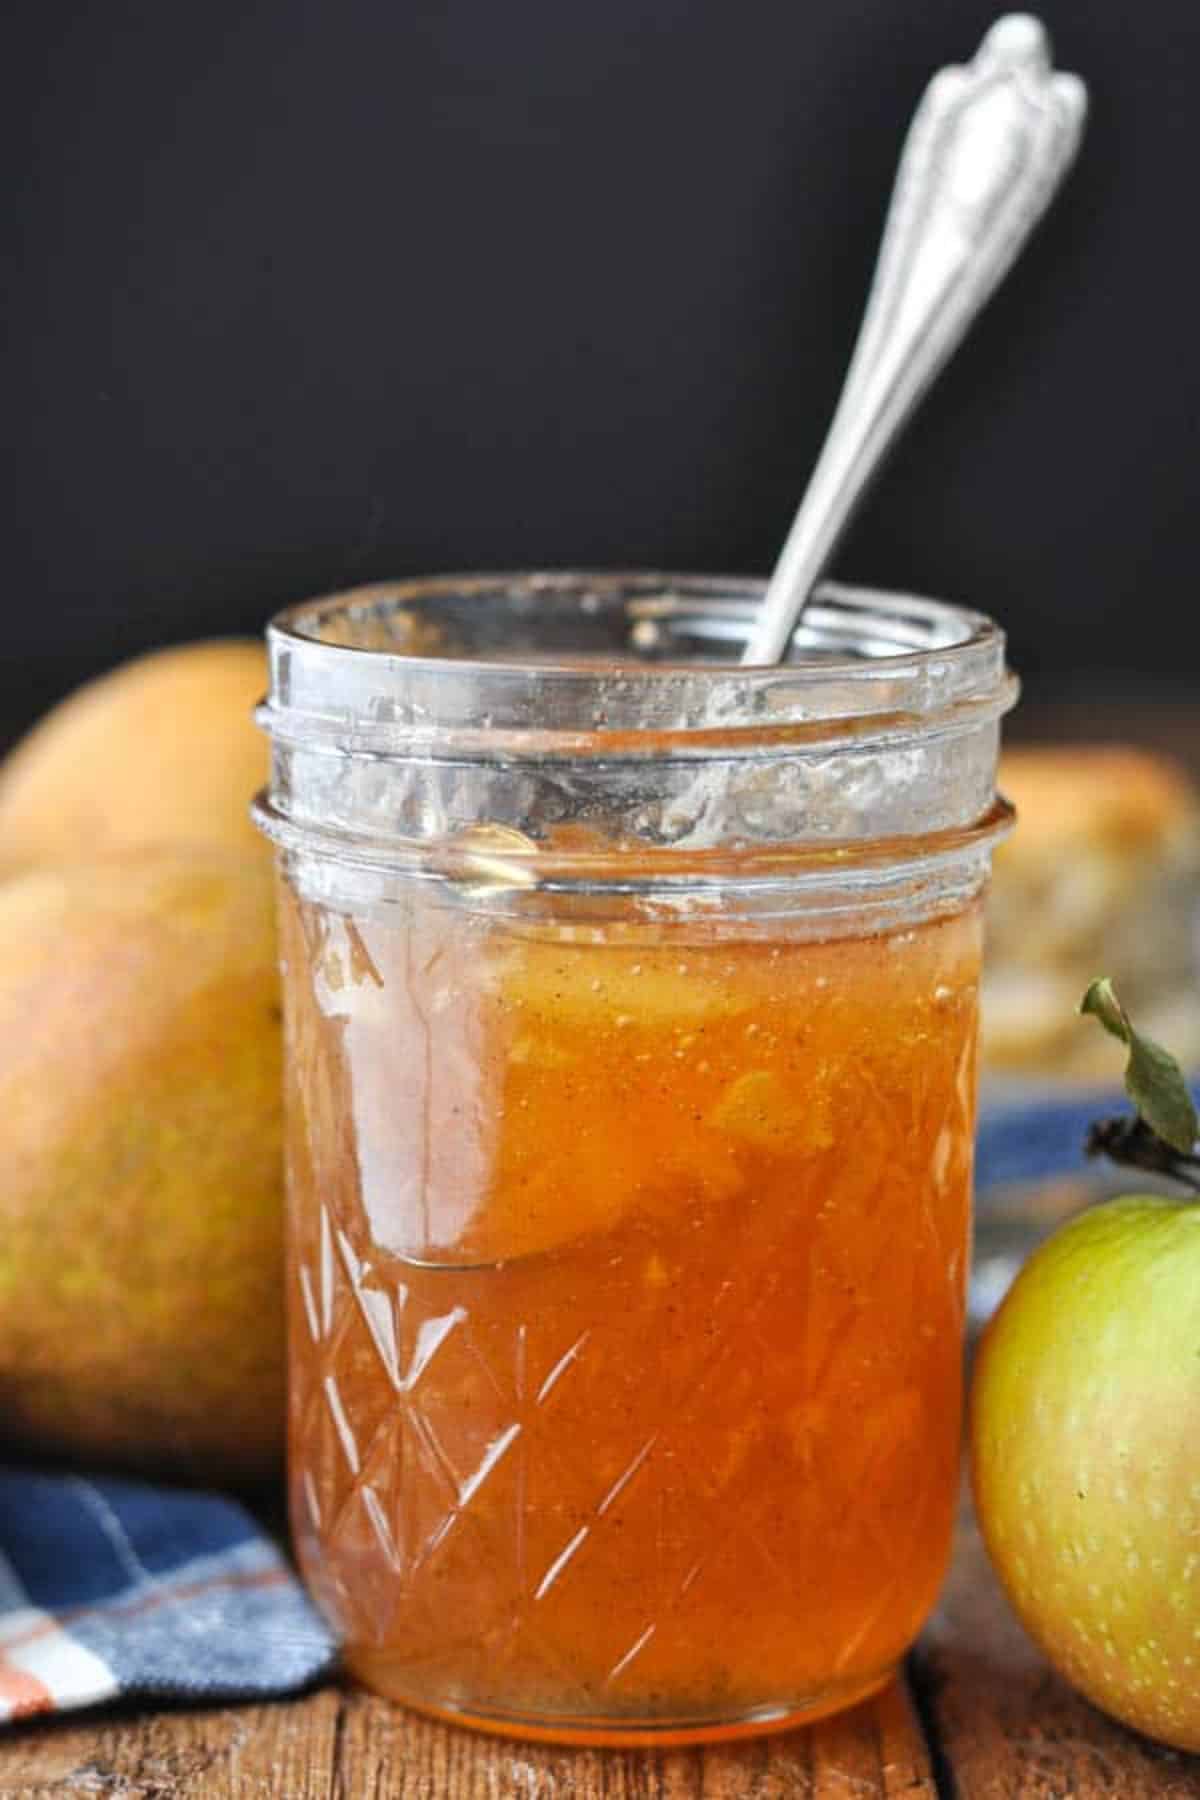 Delicious spiced apple pear jam in a glass jar with a spoon.